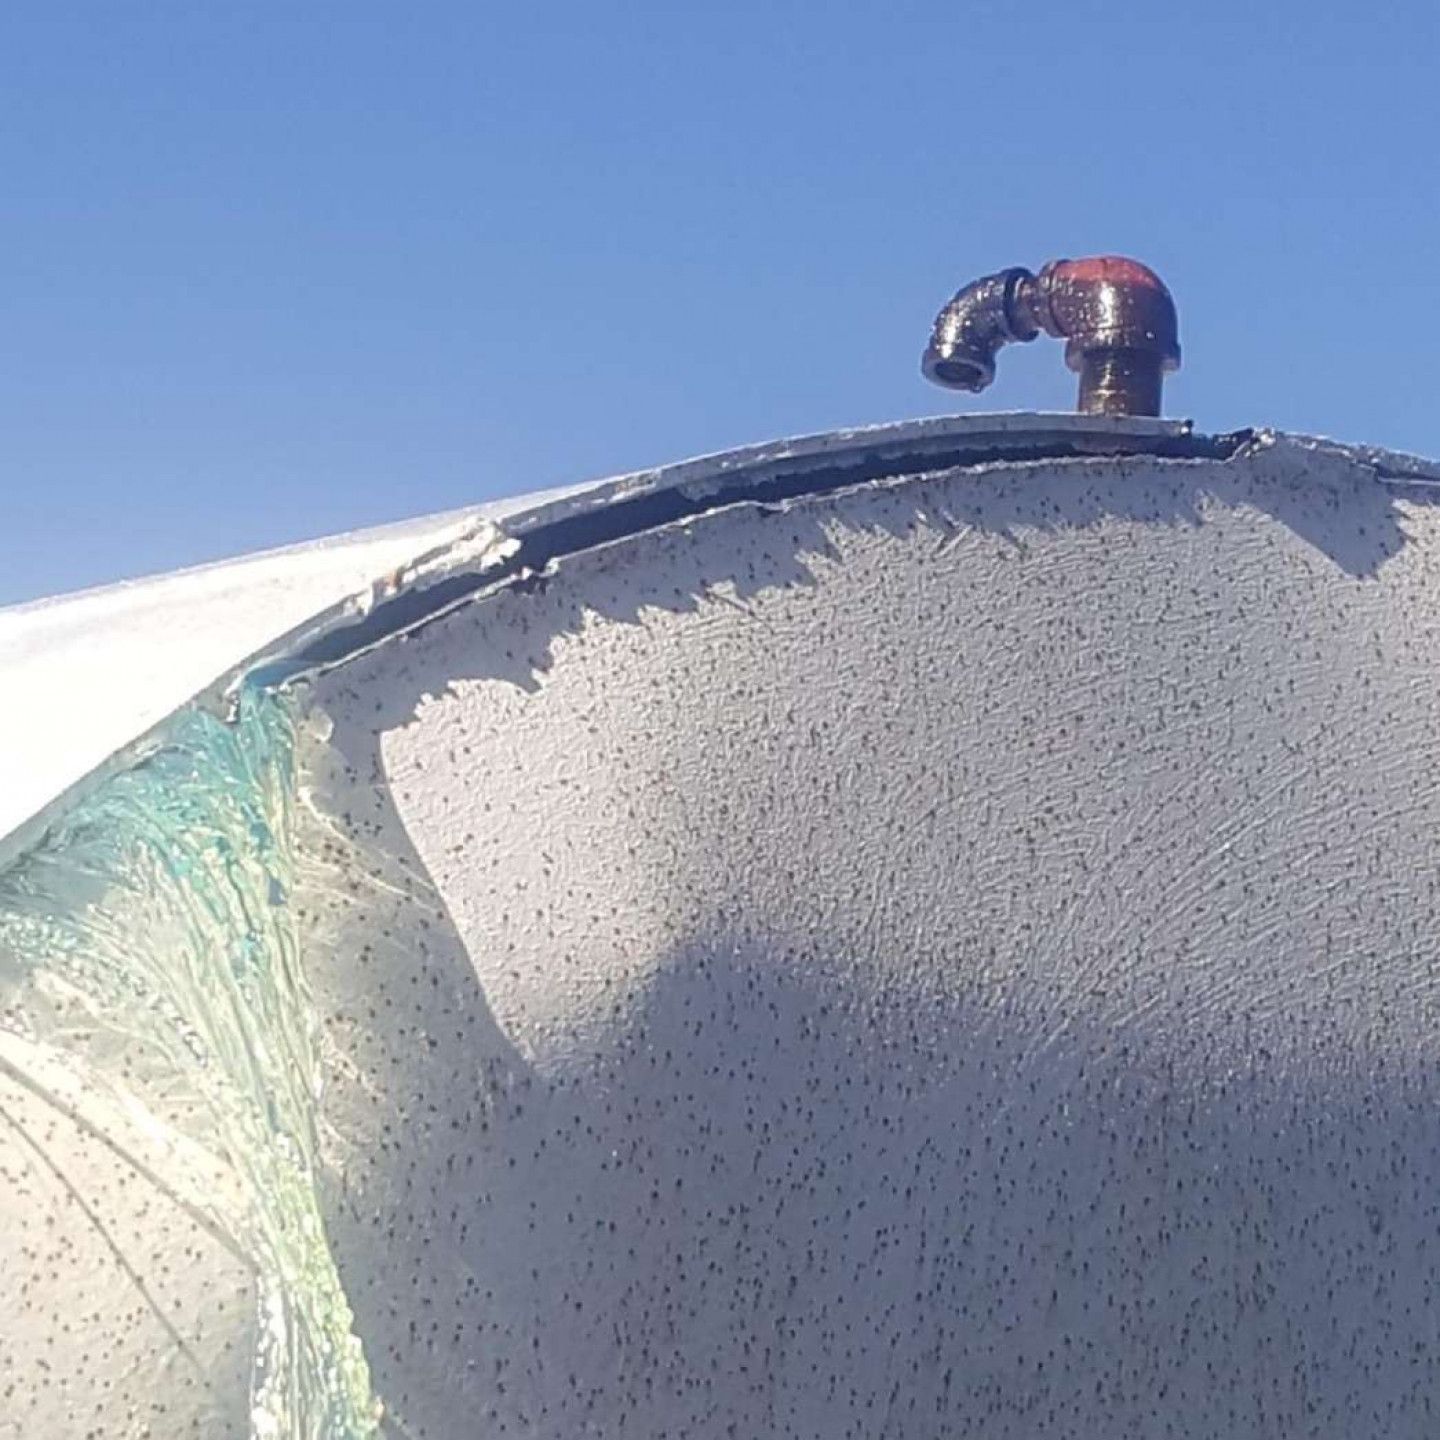 A pipe on top of a white object with a blue sky in the background